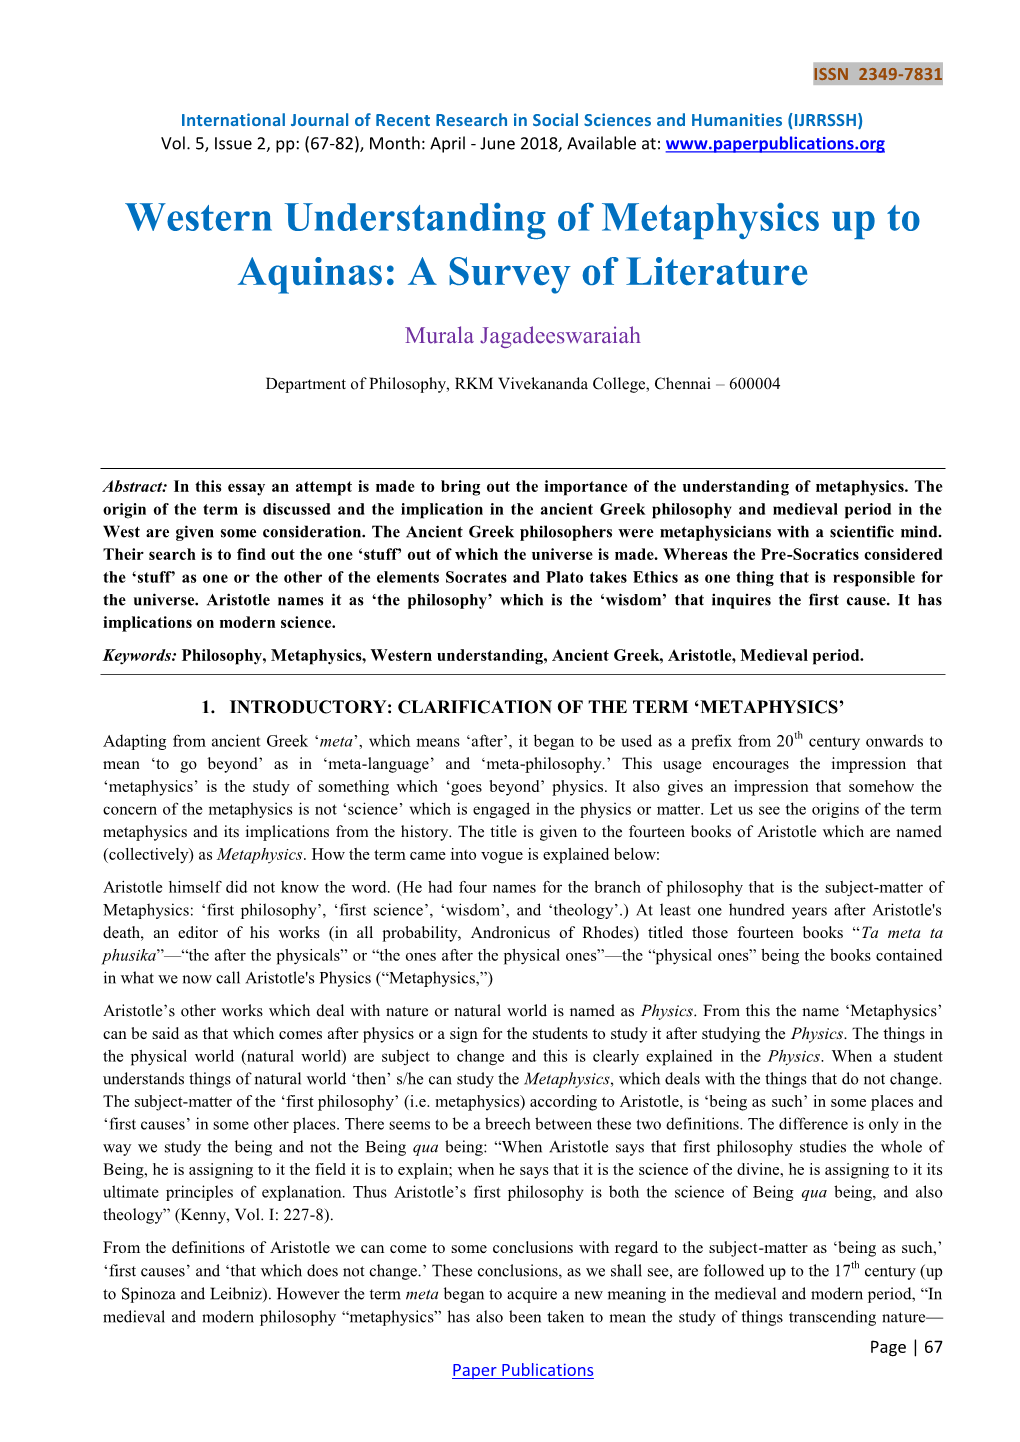 Western Understanding of Metaphysics up to Aquinas: a Survey of Literature